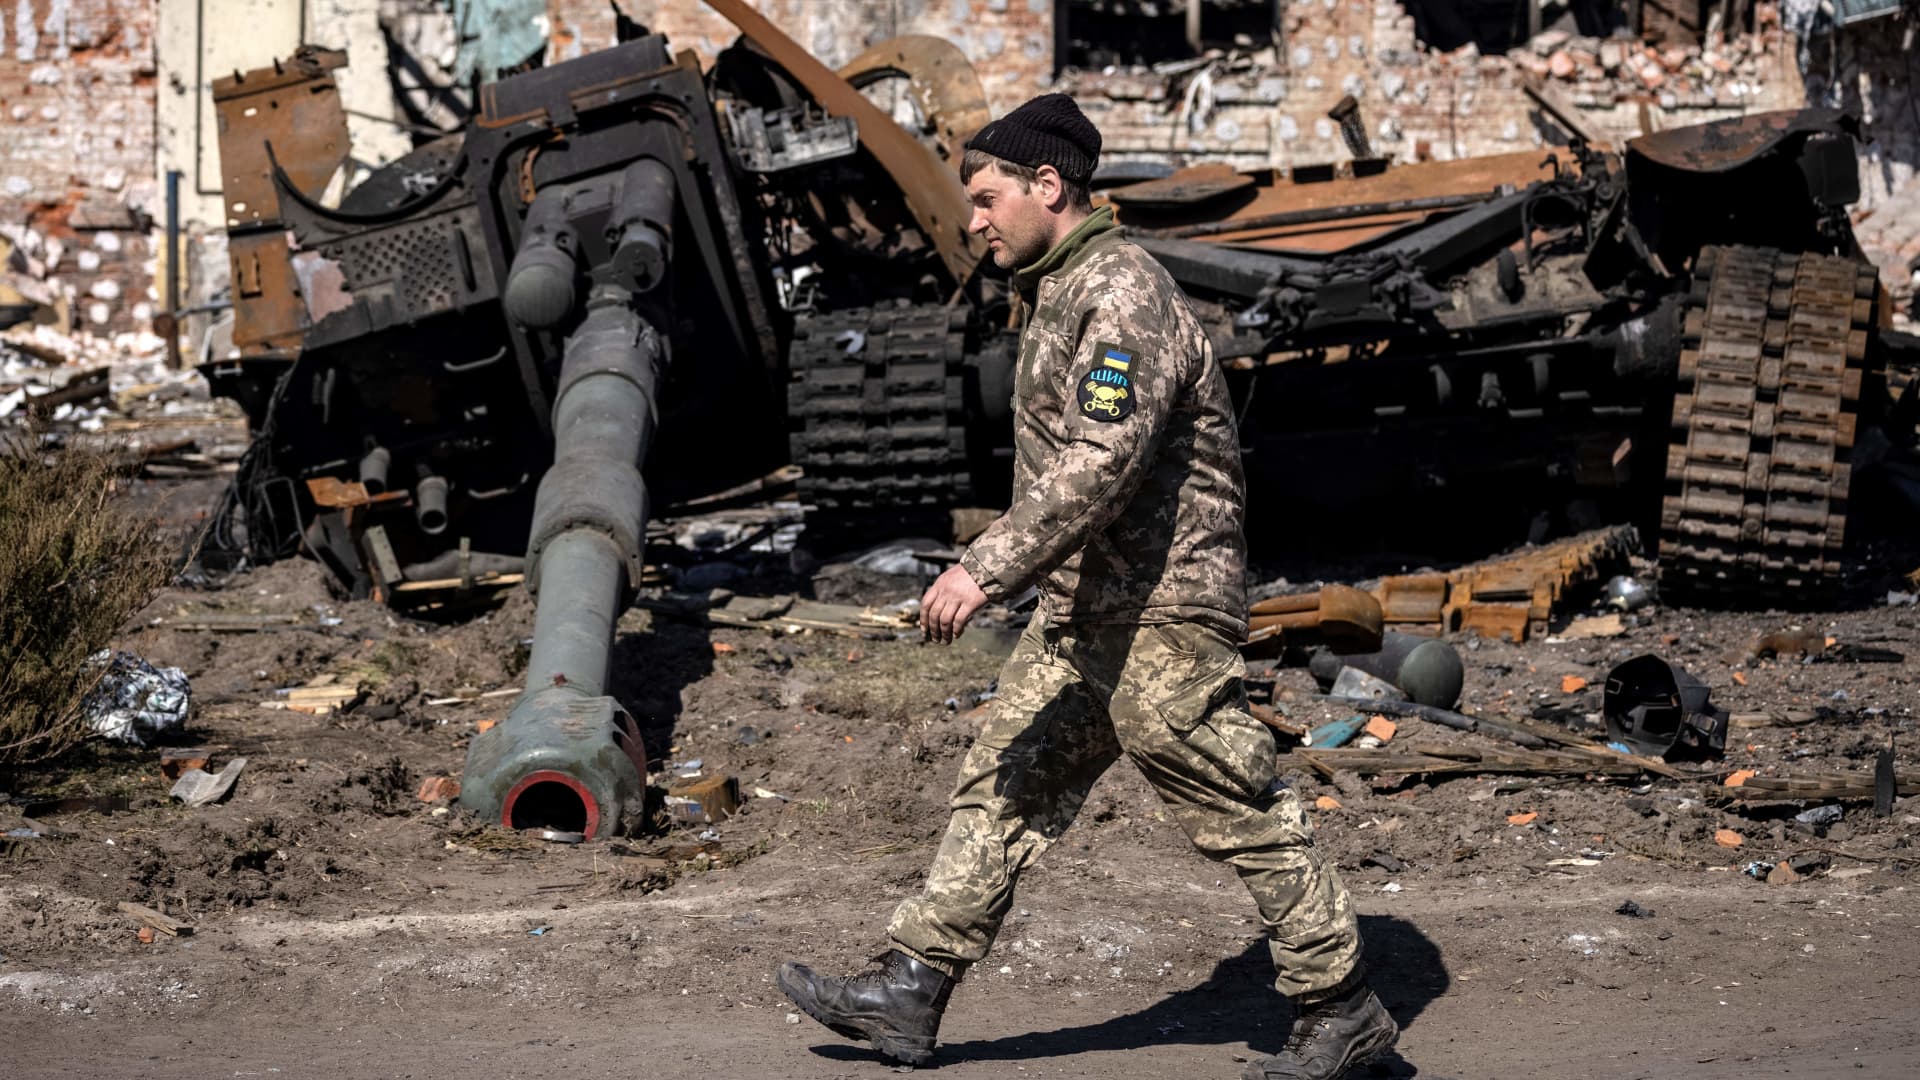 A Ukrainian serviceman walks between damaged Russian army tank and rubble of a destroyed building in the northeastern city of Trostianets, on March 29, 2022.